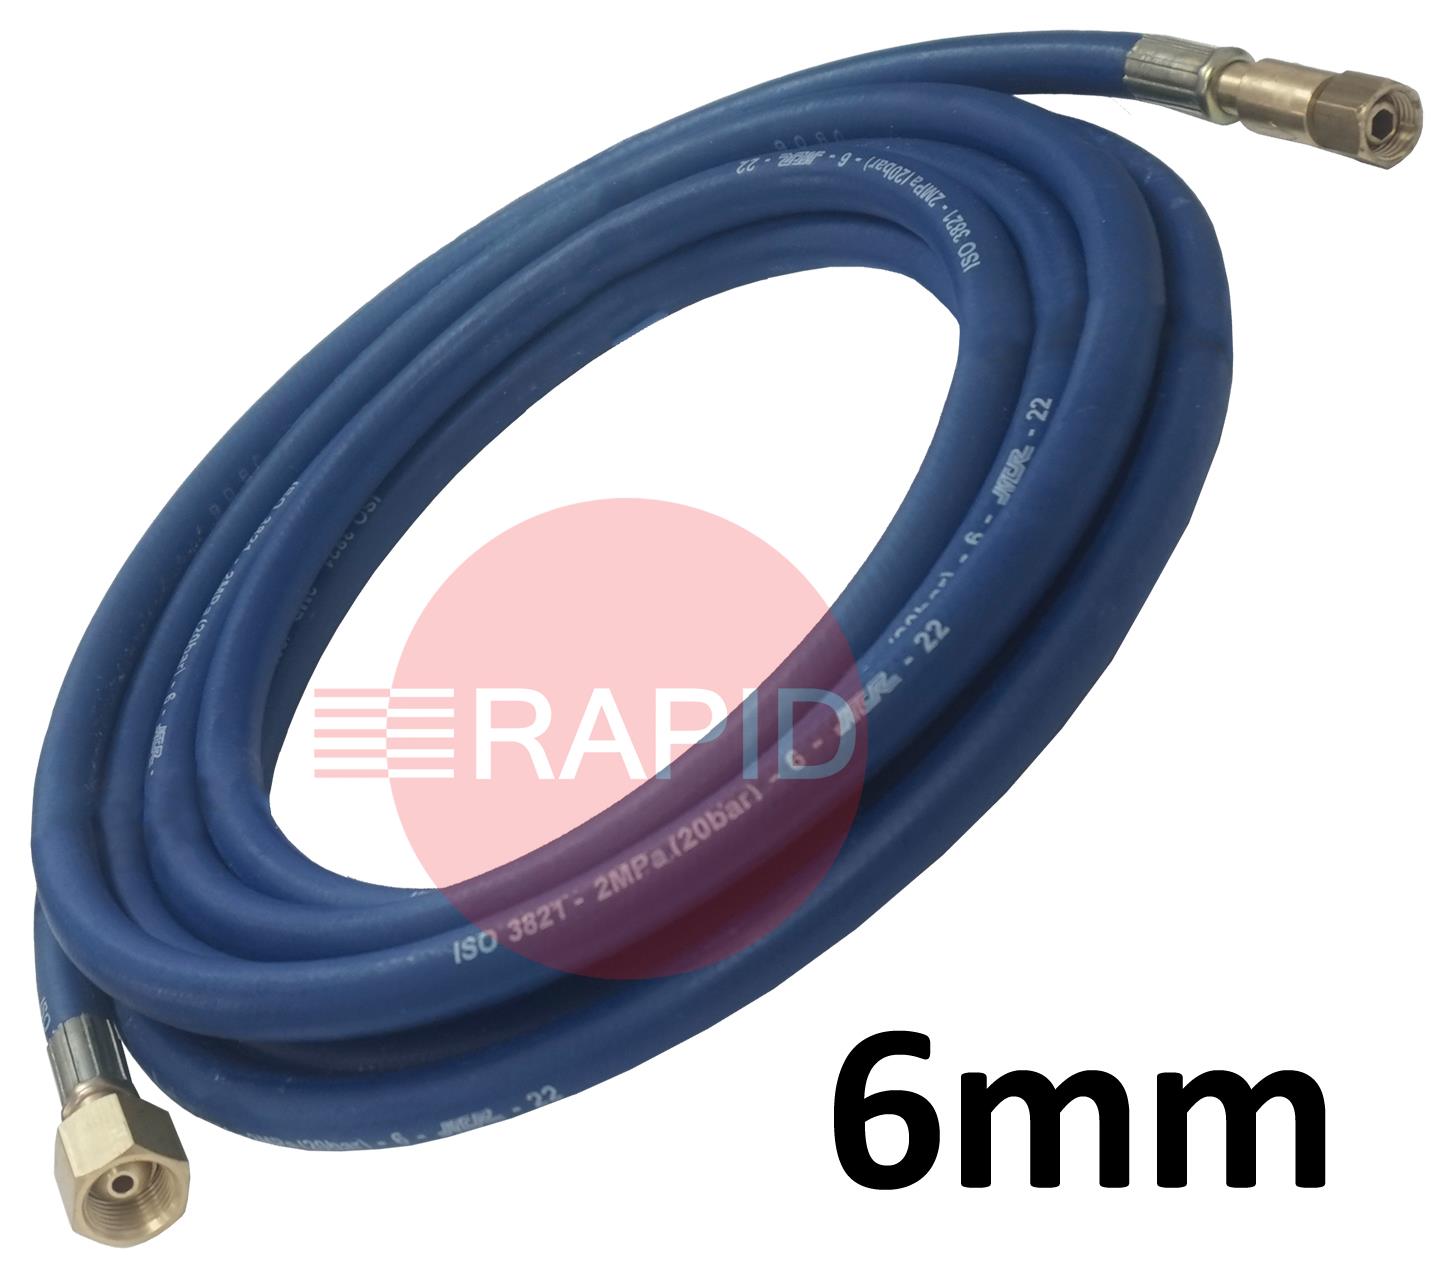 A5110  Fitted Oxygen Hose. 6mm Bore. G1/4 Check Valve & G3/8 Regulator Connection - 20m